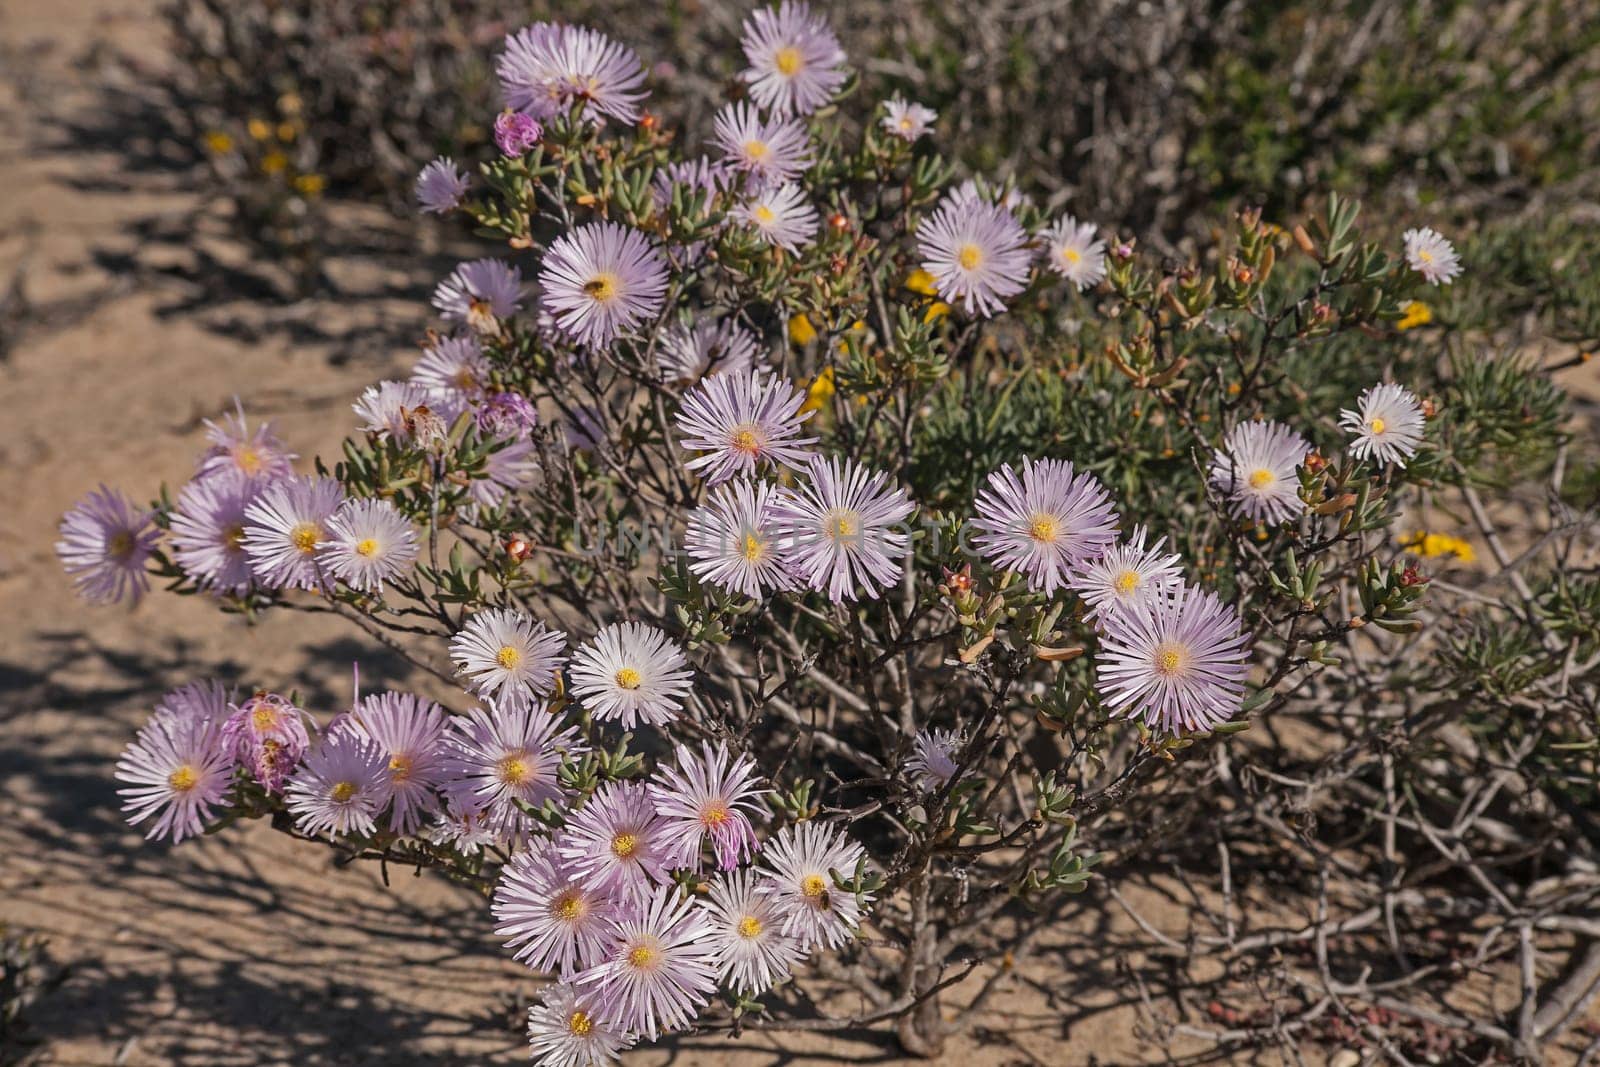 Namaqualand Spring Flowers 11439 by kobus_peche